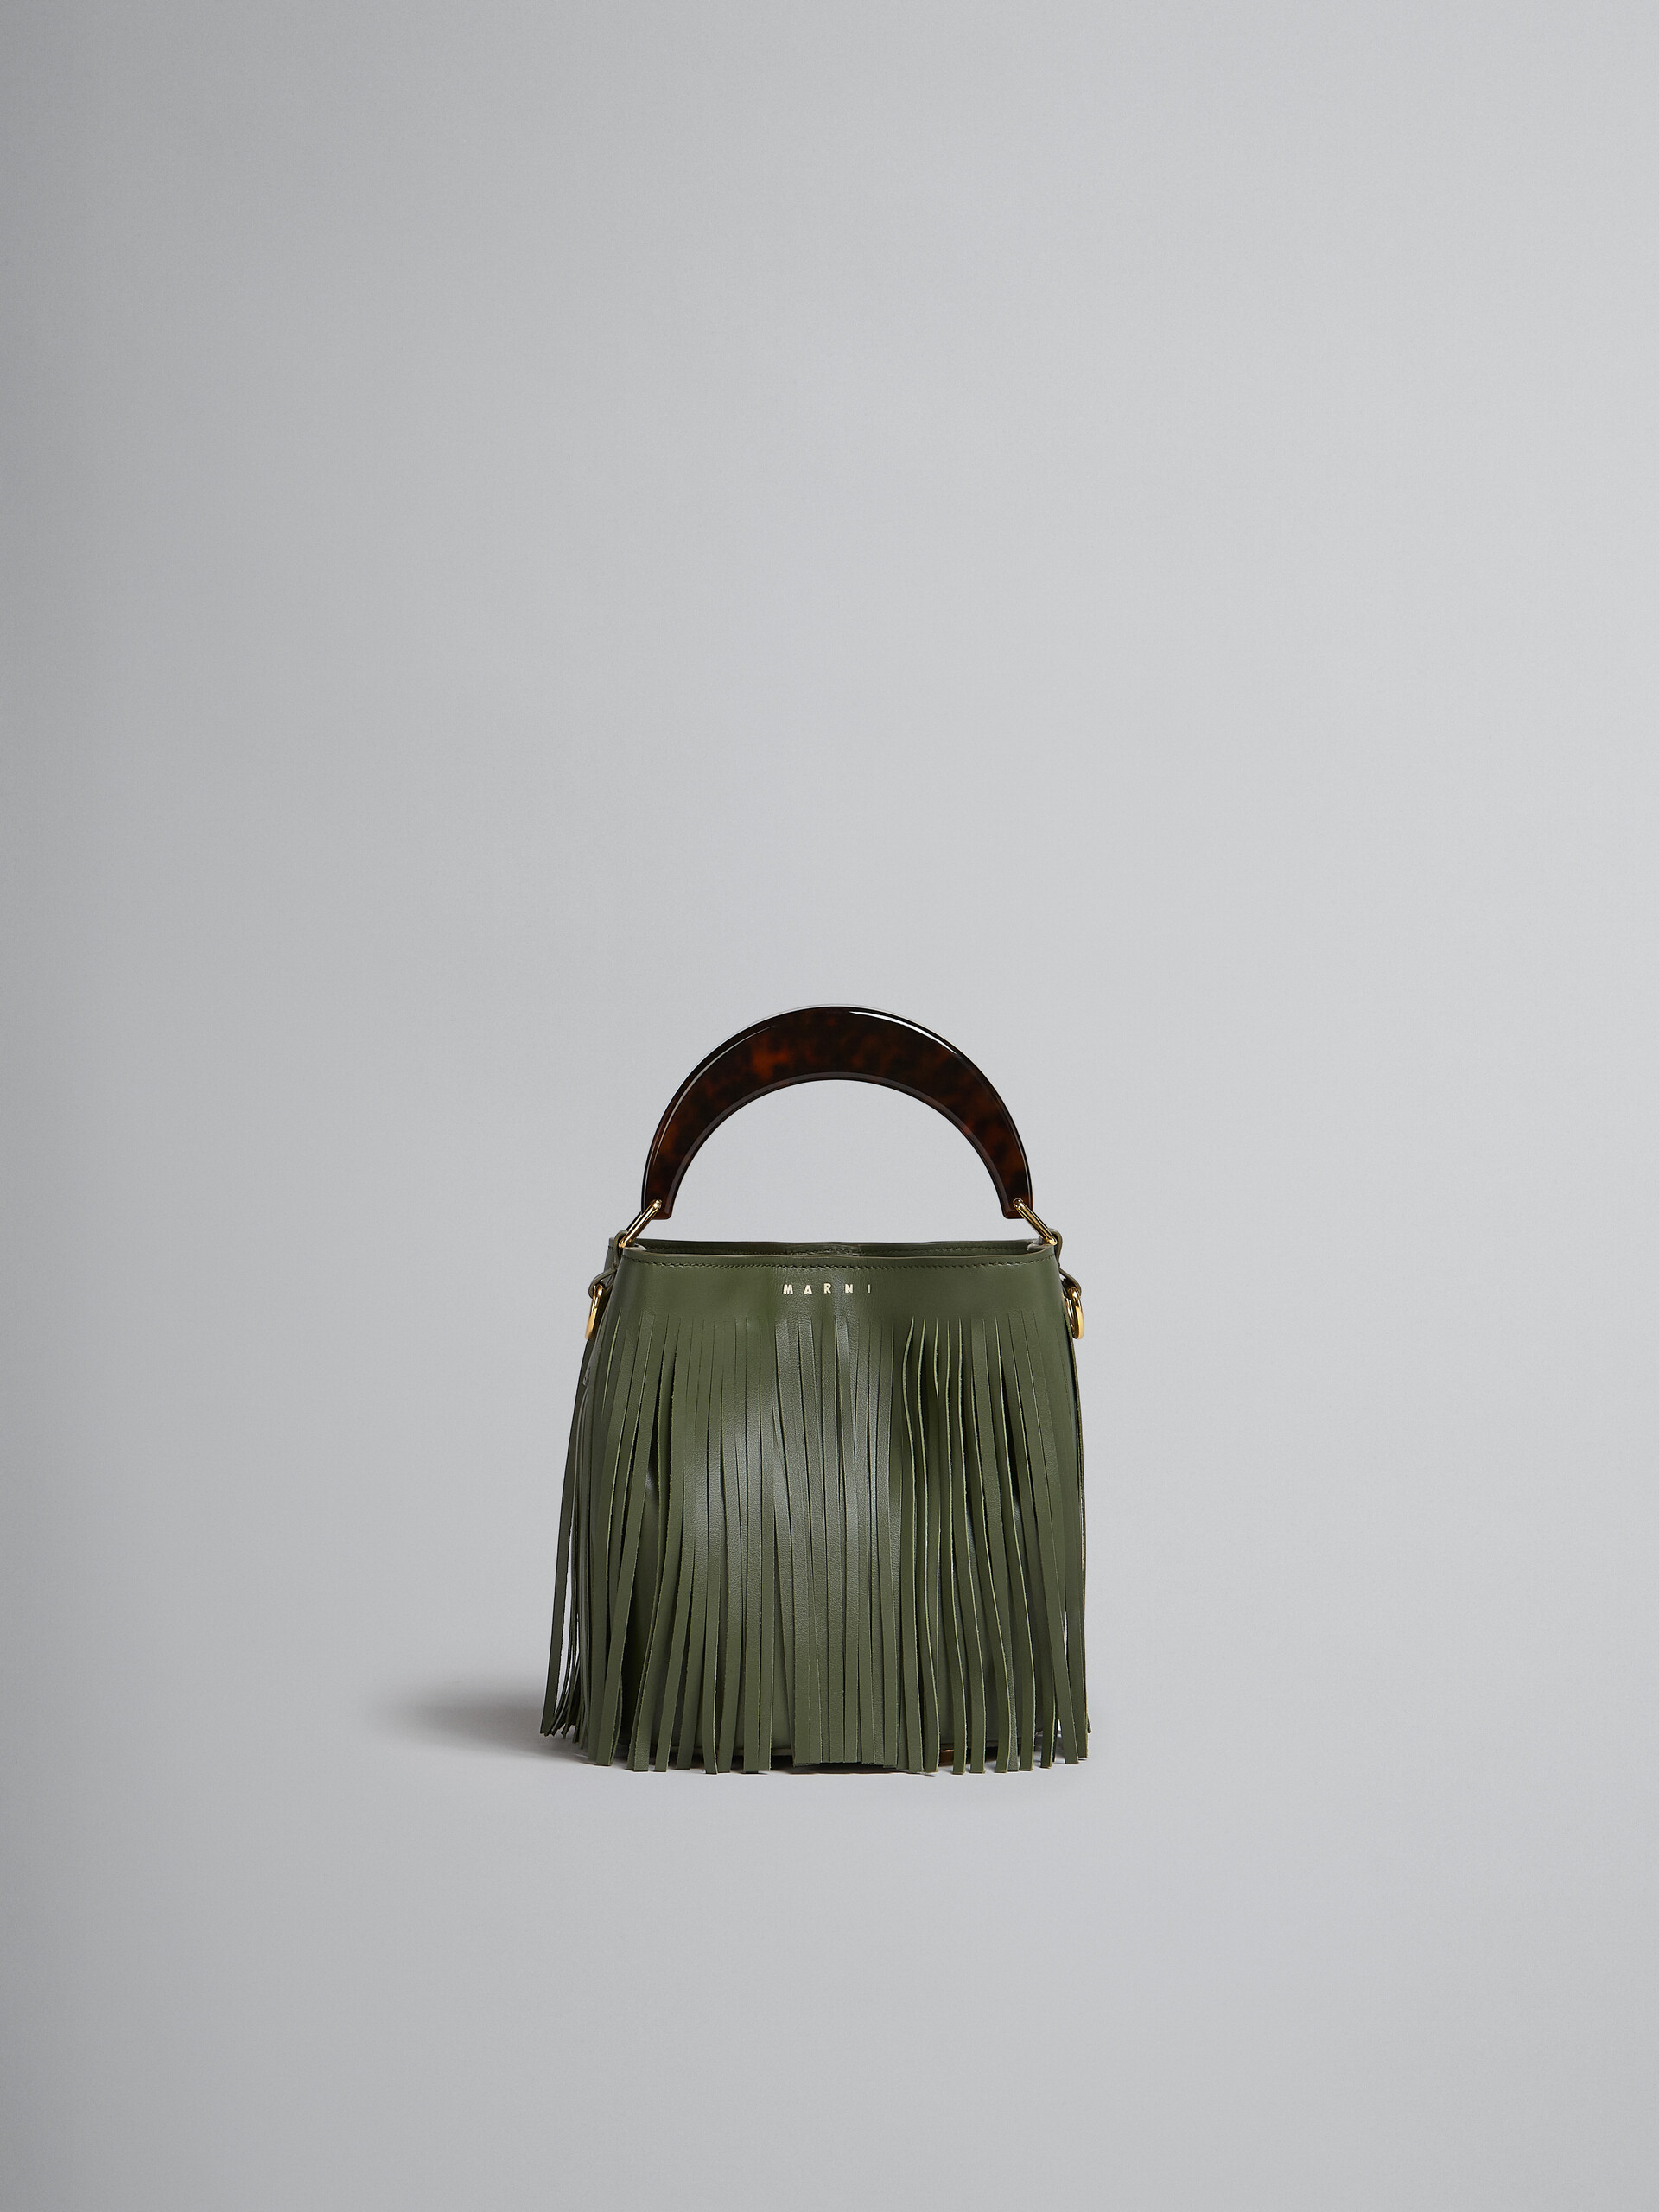 Venice Small Bucket in green leather with fringes - Shoulder Bag - Image 1